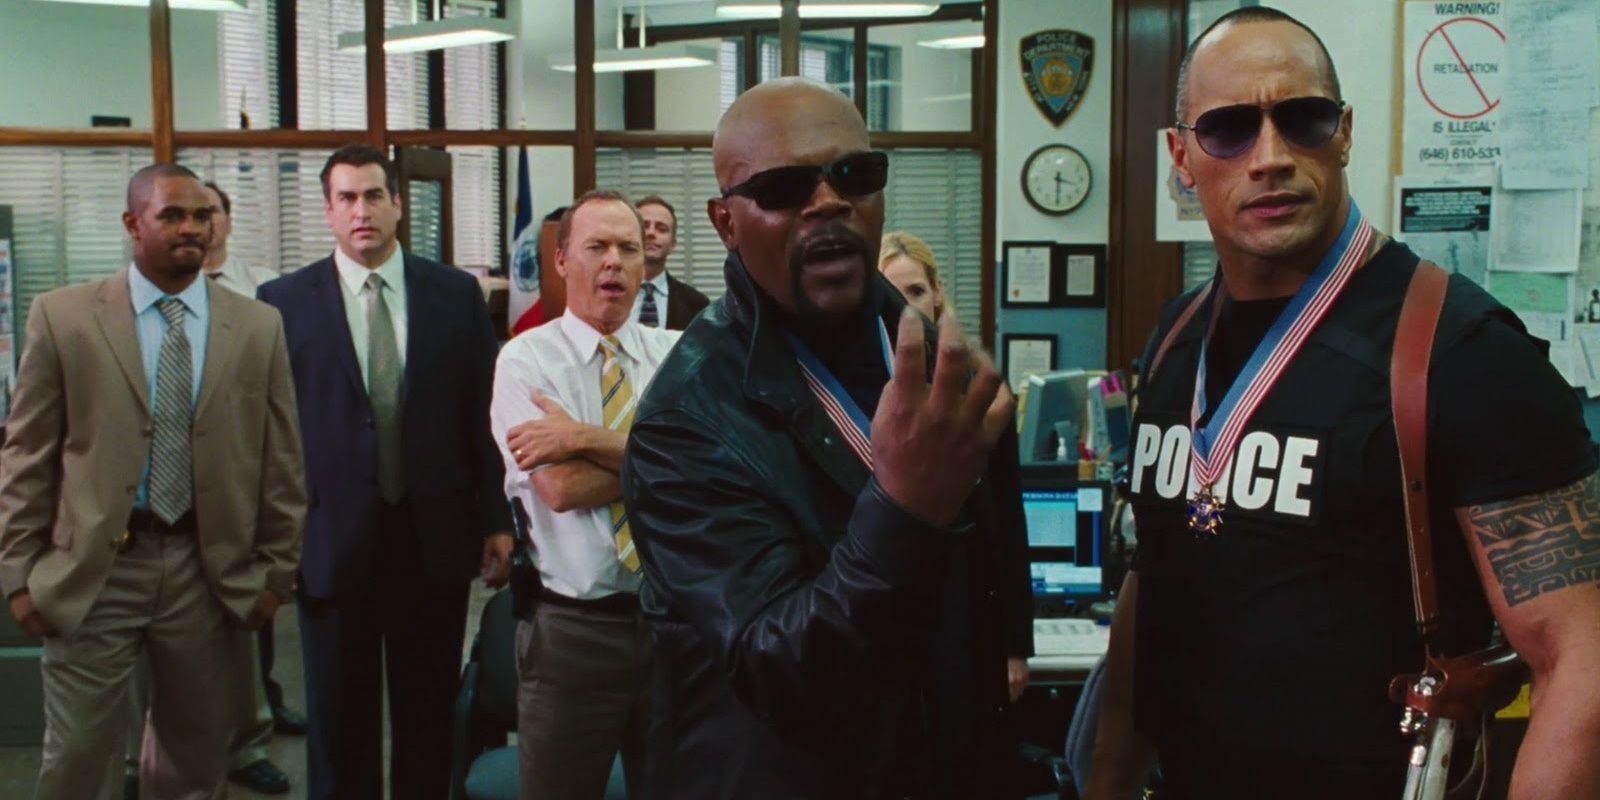 PK and Chris flaunt their success in a police station in The Other Guys